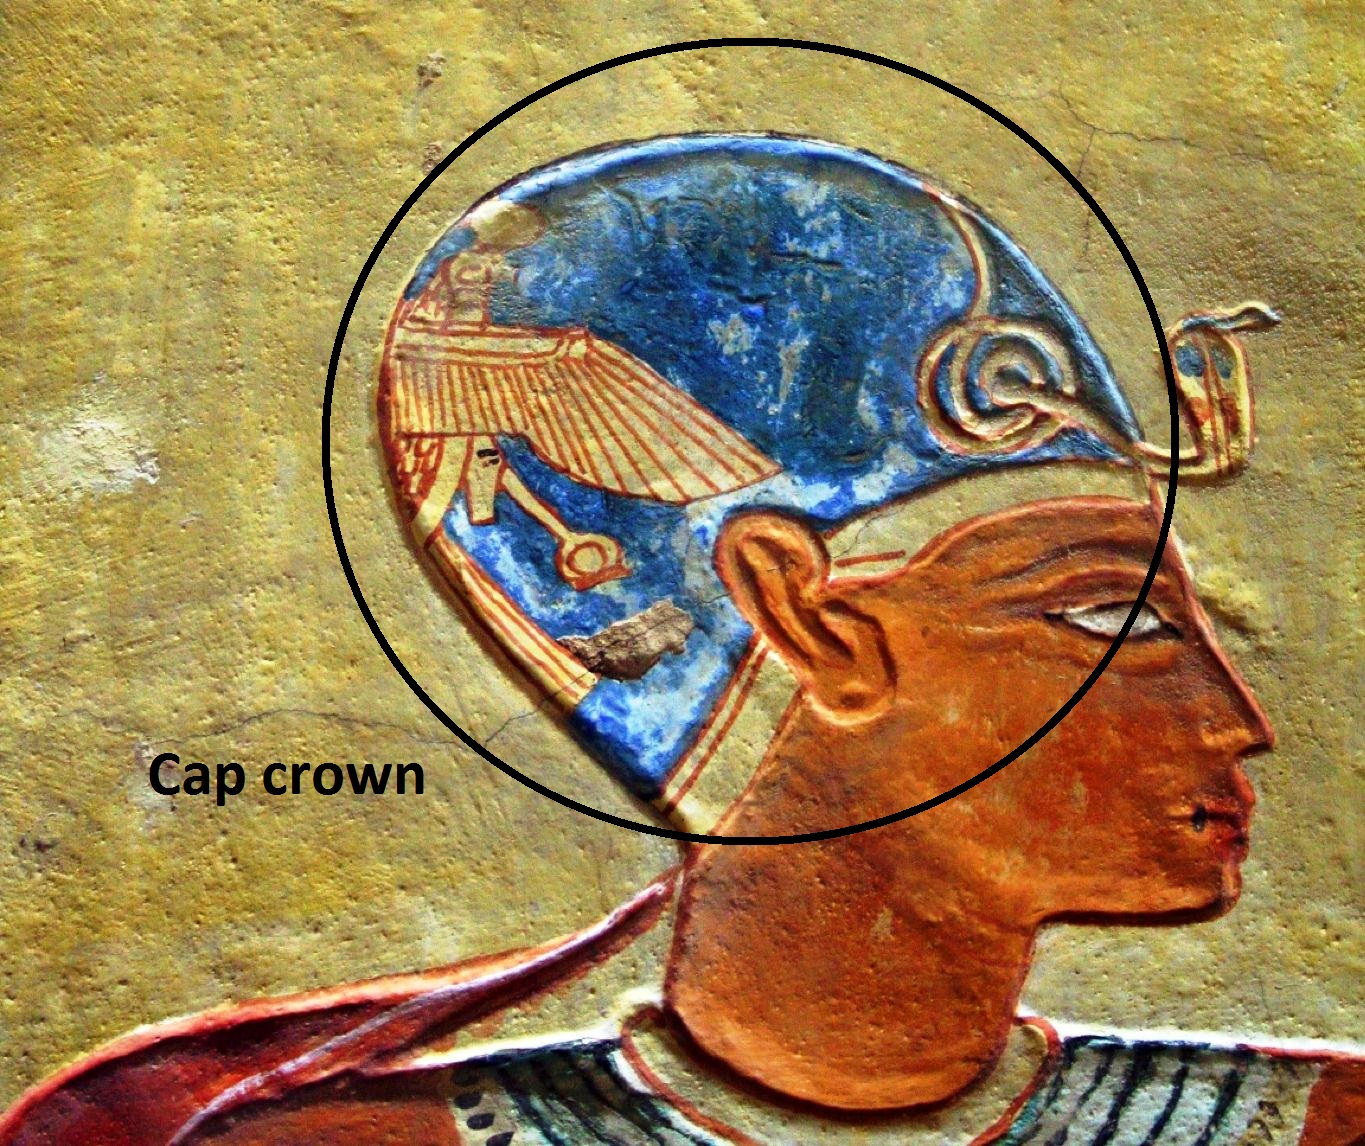 Variable of the Day, Ancient Egypt: Cap crown